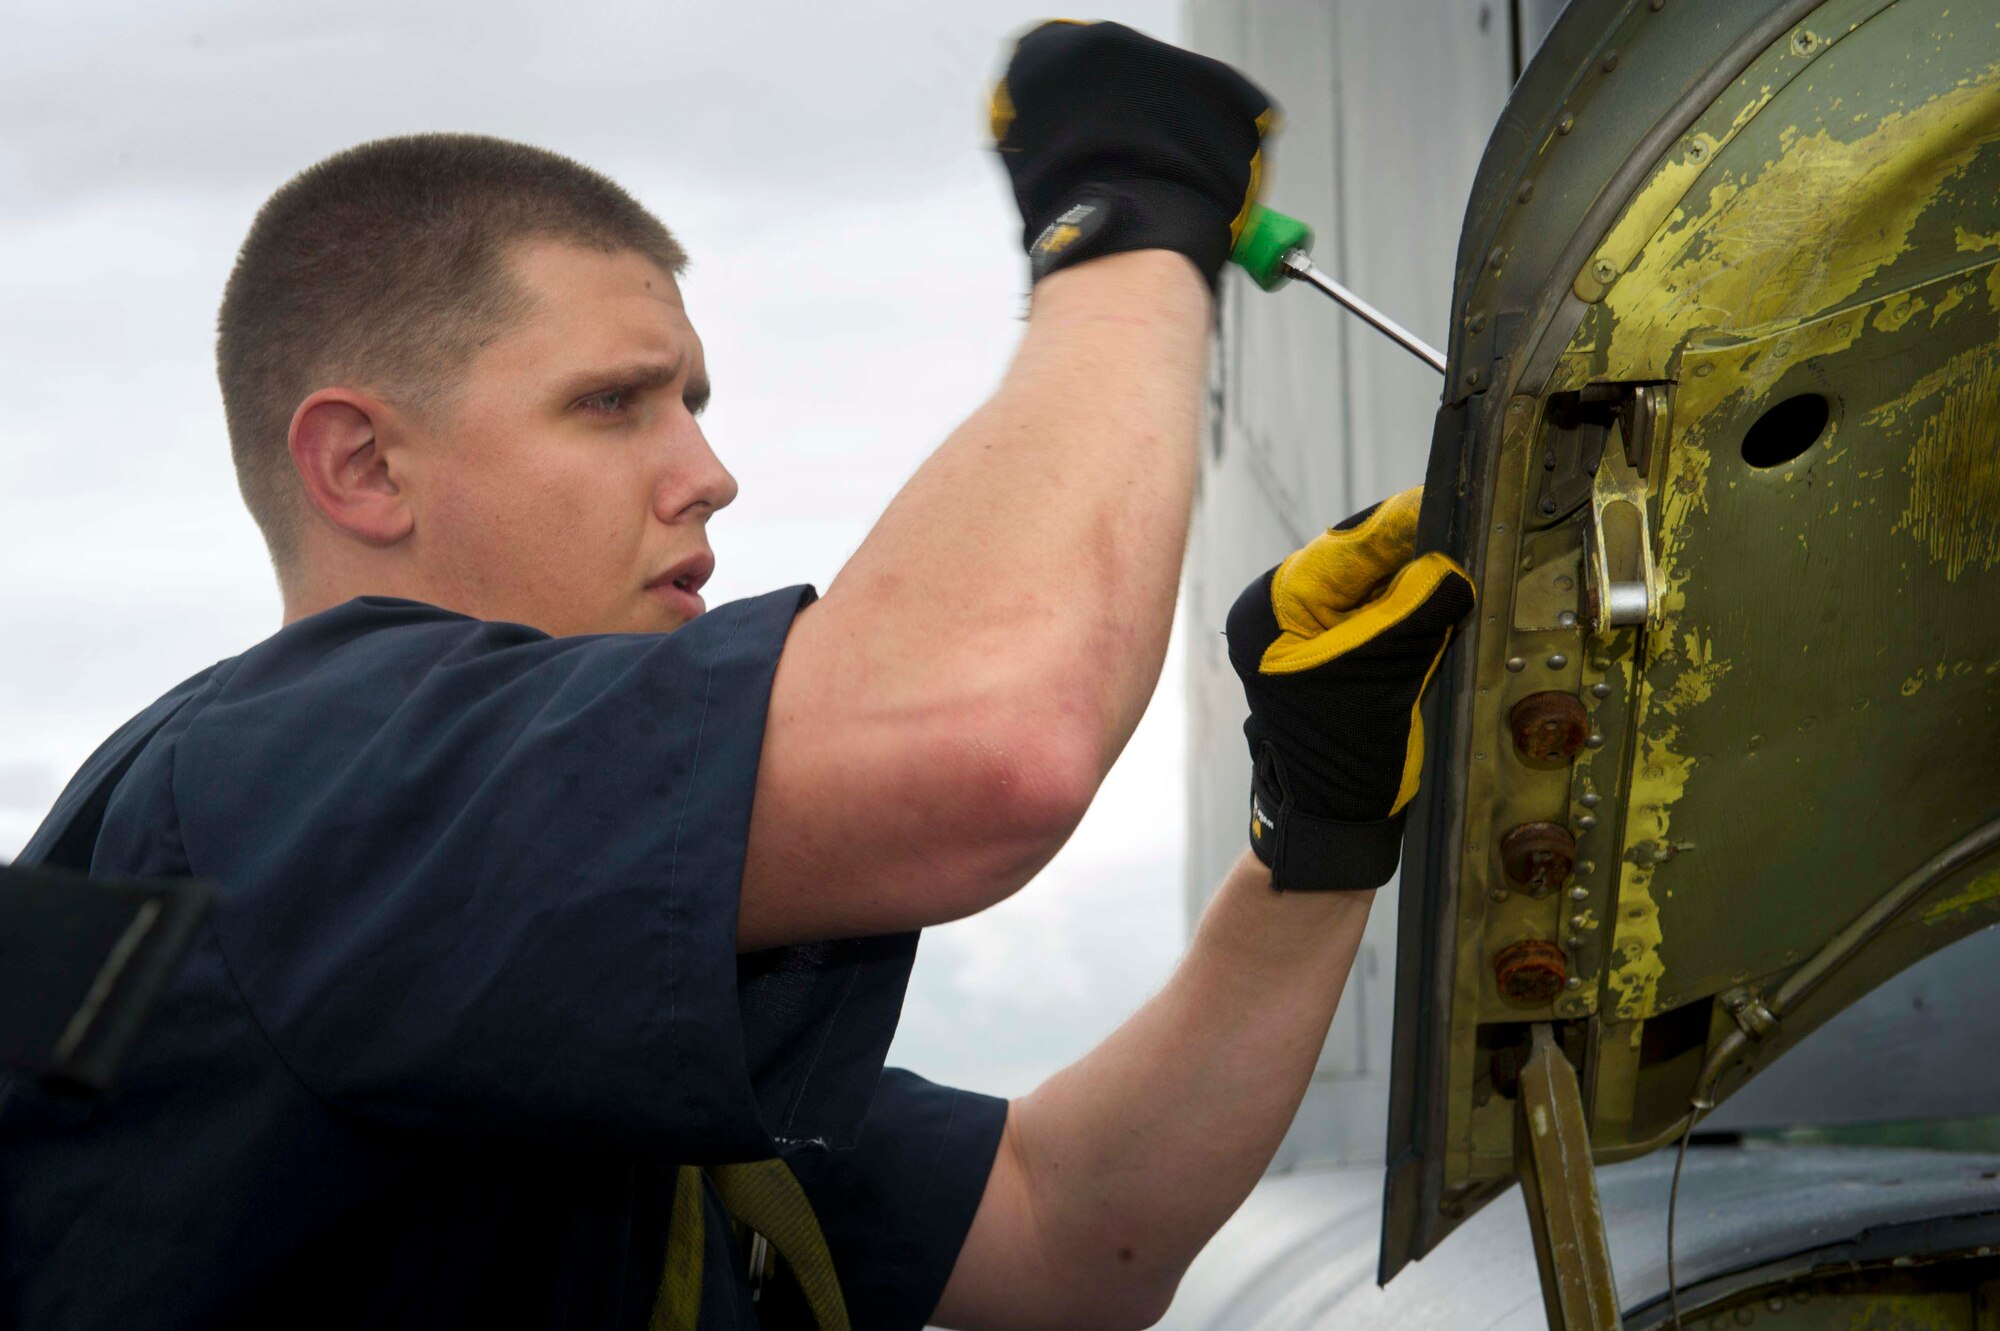 U.S. Air Force Staff Sgt. Justin Yochum, 5th Expeditionary Maintenance Squadron aerospace repair and reclamation journeyman, unscrews a panel to replace a drag chute on a B-52H Stratofortress at RAF Fairford, United Kingdom, June 13, 2016. The drag chute system consists of mechanisms which are used to close the drag chute door and to deploy and jettison the drag chute. Mechanisms are in place to prevent jettisoning the chute before deployment and to automatically jettison the chute if the drag chute door opens inadvertently. (U.S. Air Force photo/Senior Airman Sahara L. Fales)